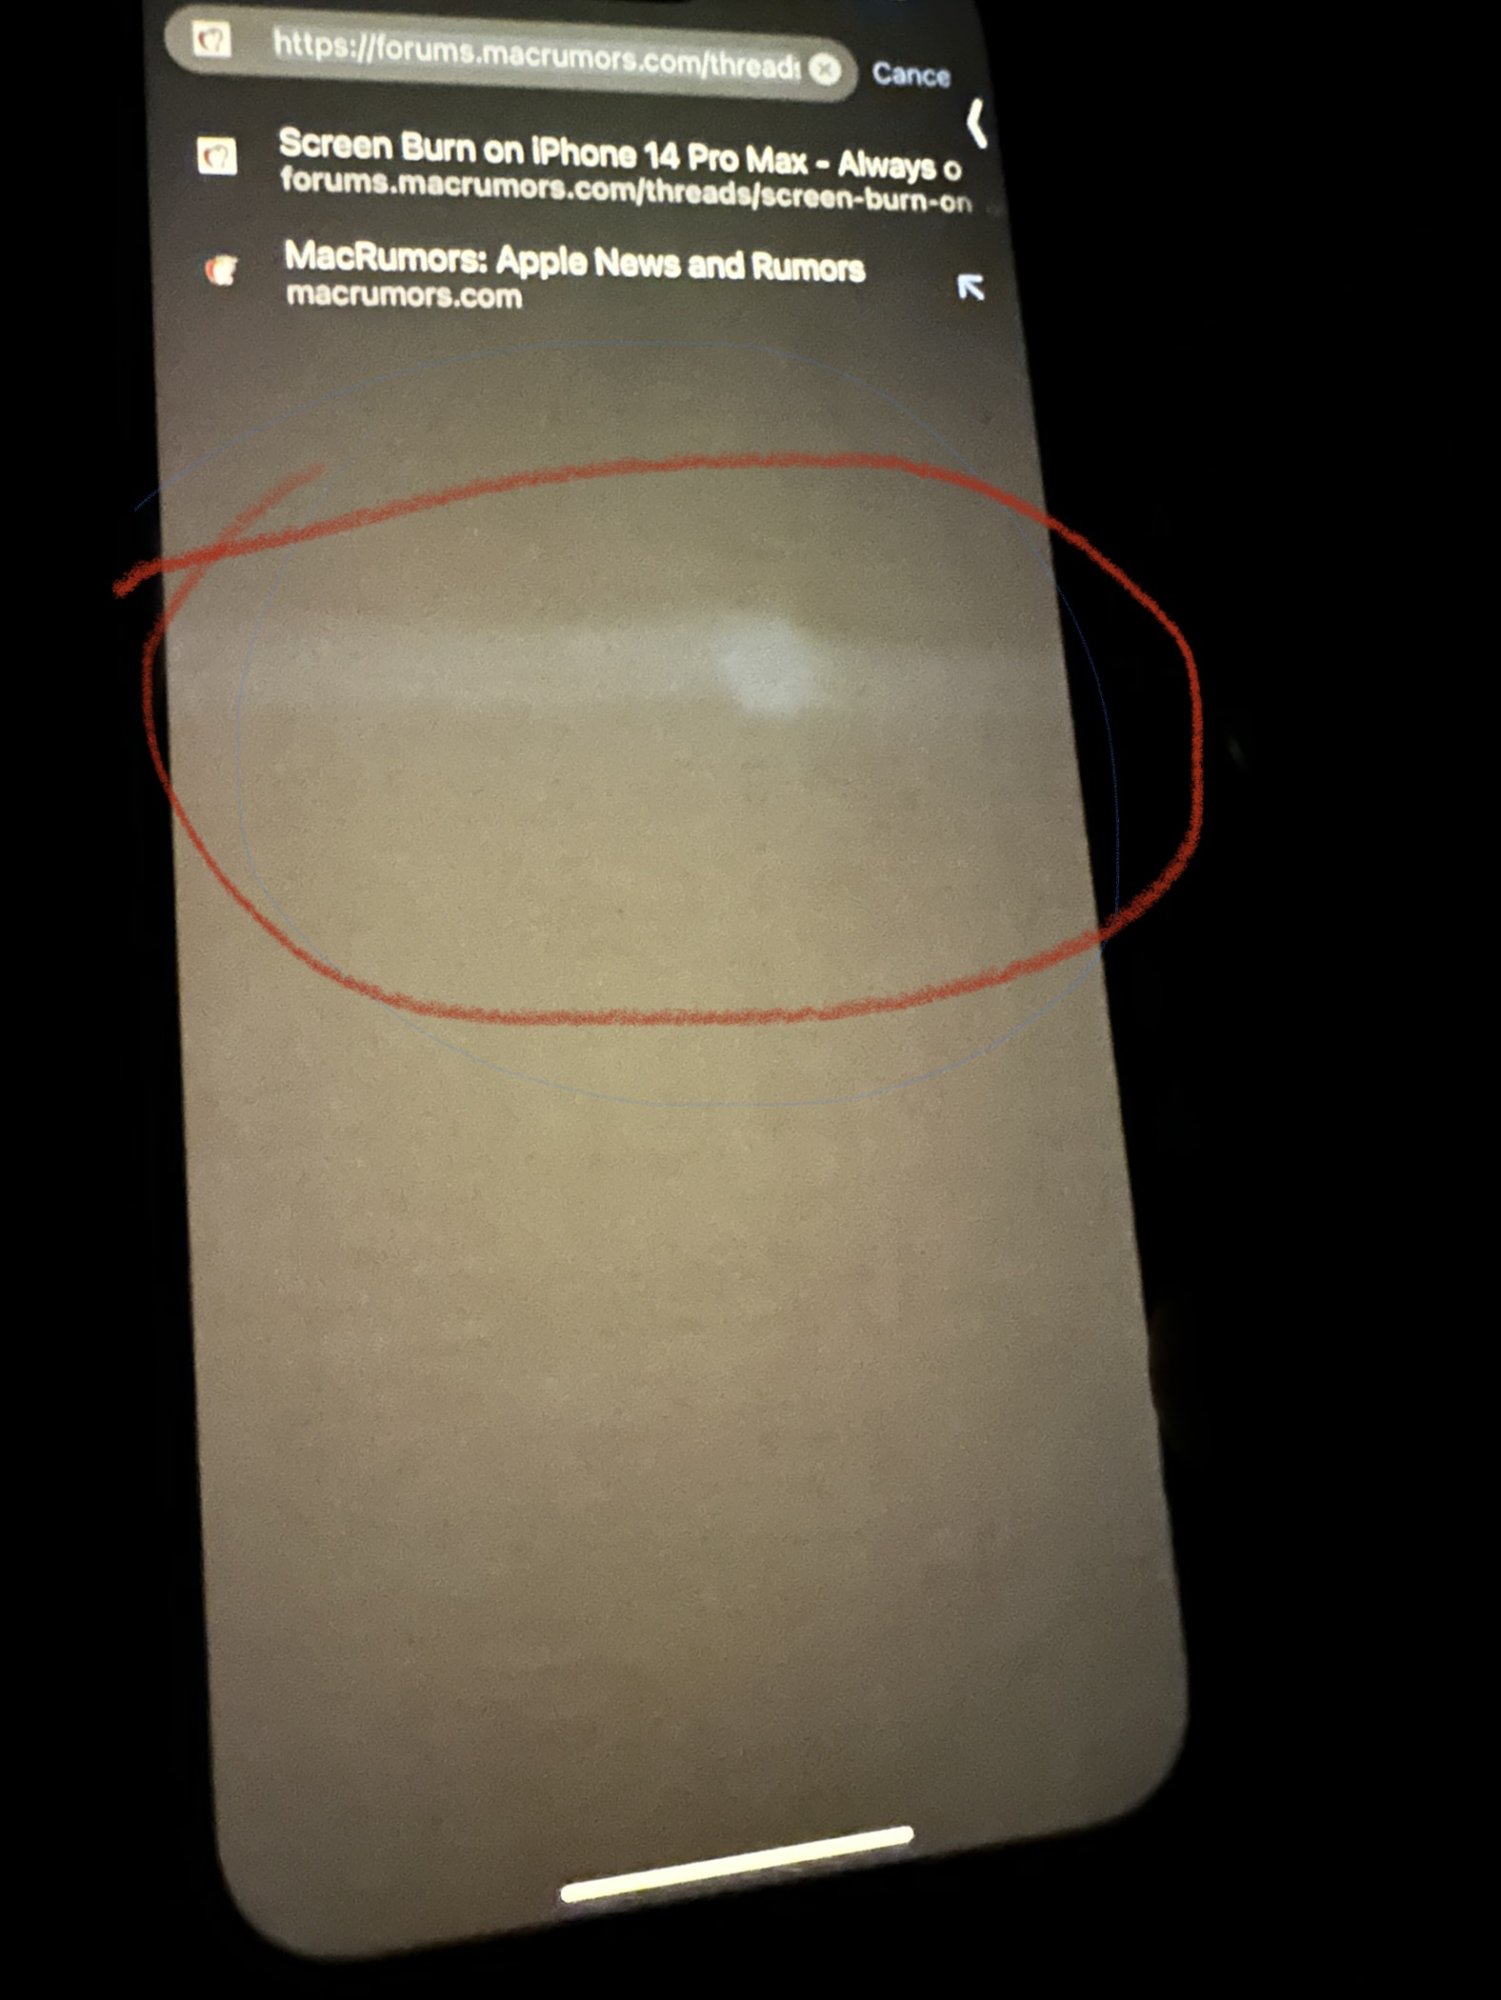 Screen Burn on iPhone 14 Pro Max - Always on display (SOLVED